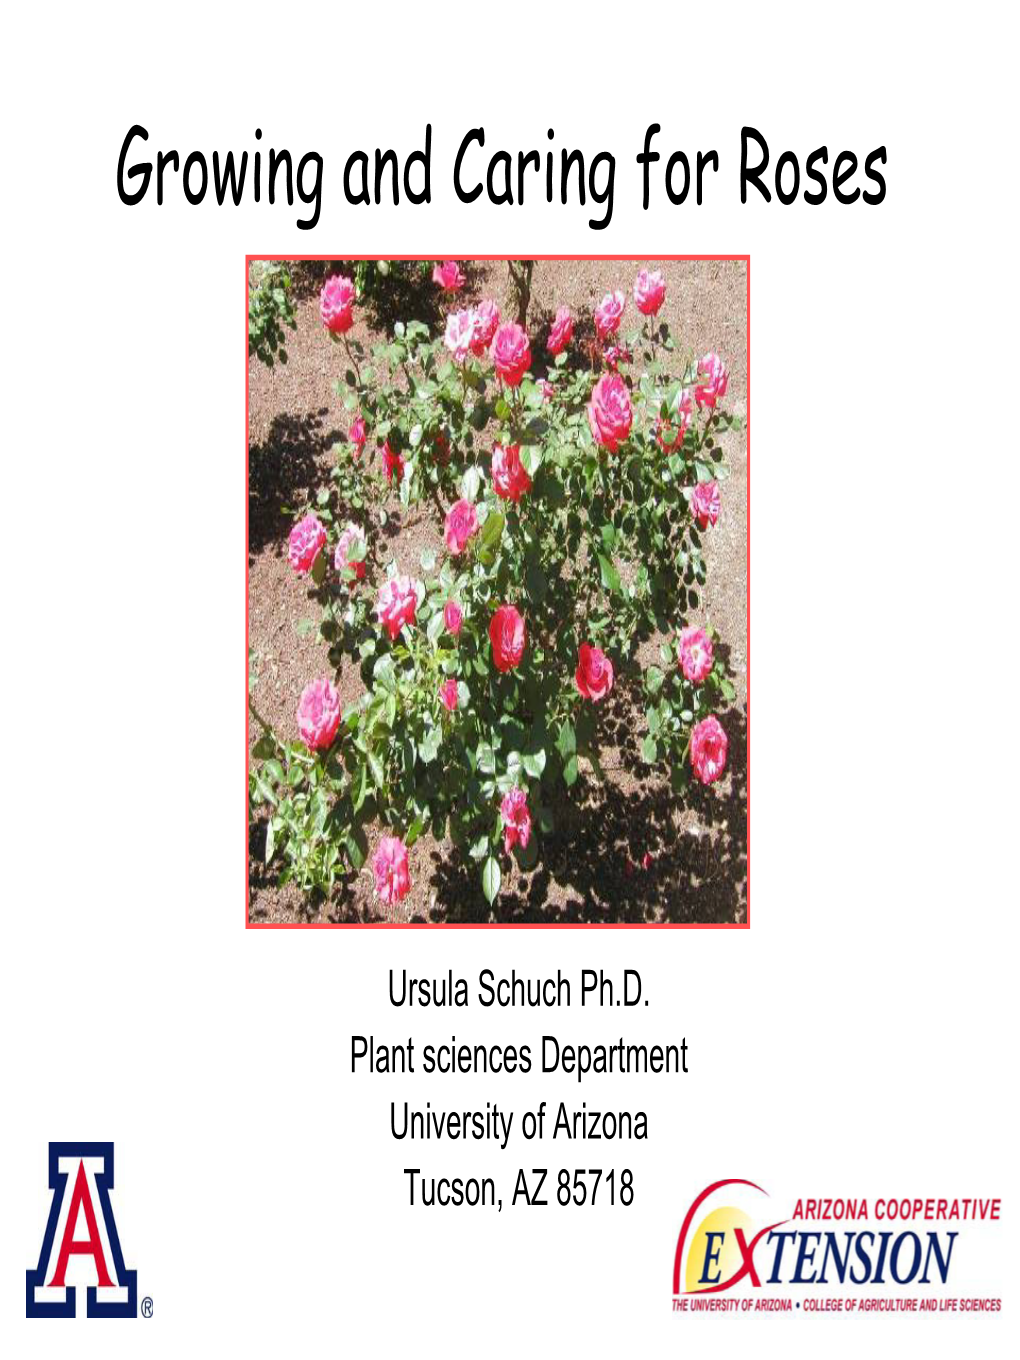 Growing and Caring for Roses